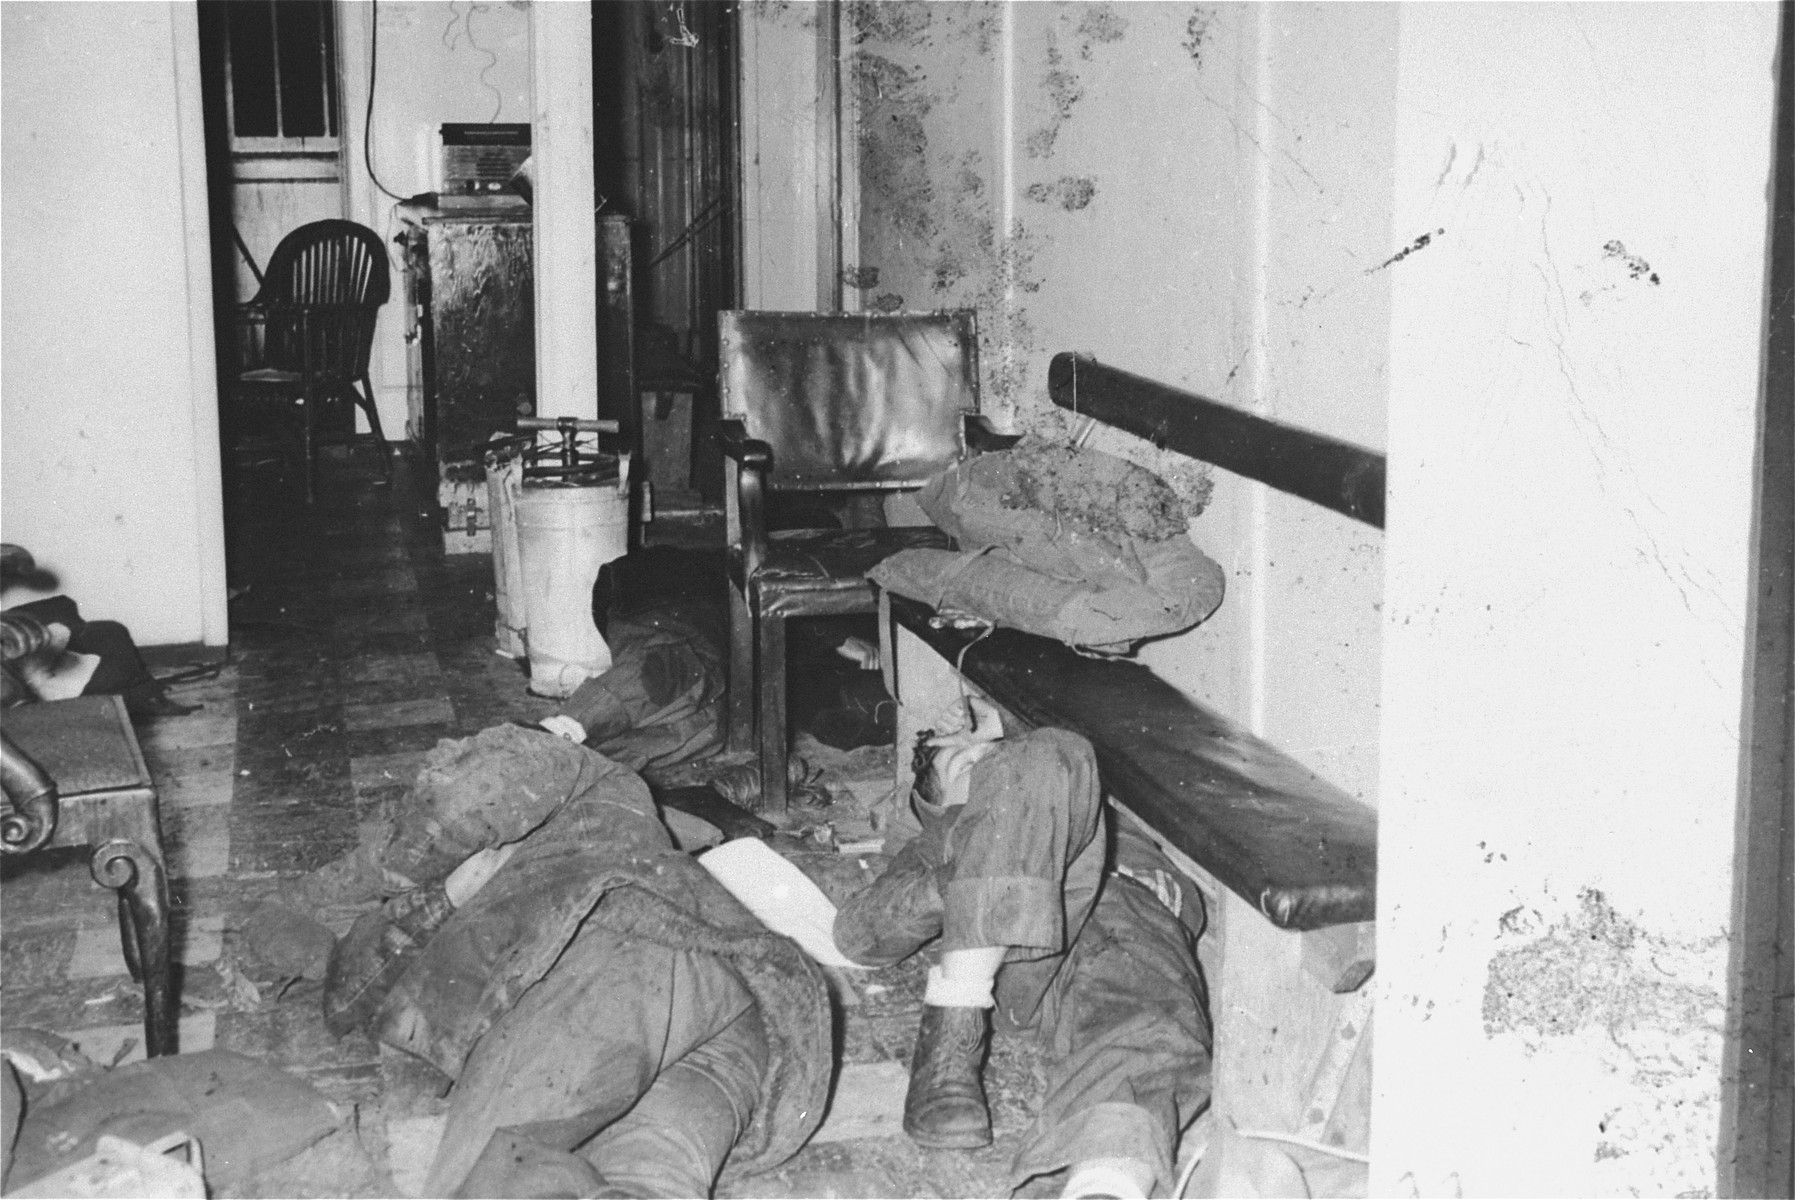 Crew members sleep on the floor of an office in the President Warfield (later the Exodus 1947) after the gale that nearly sunk the ship on its shakedown cruise.